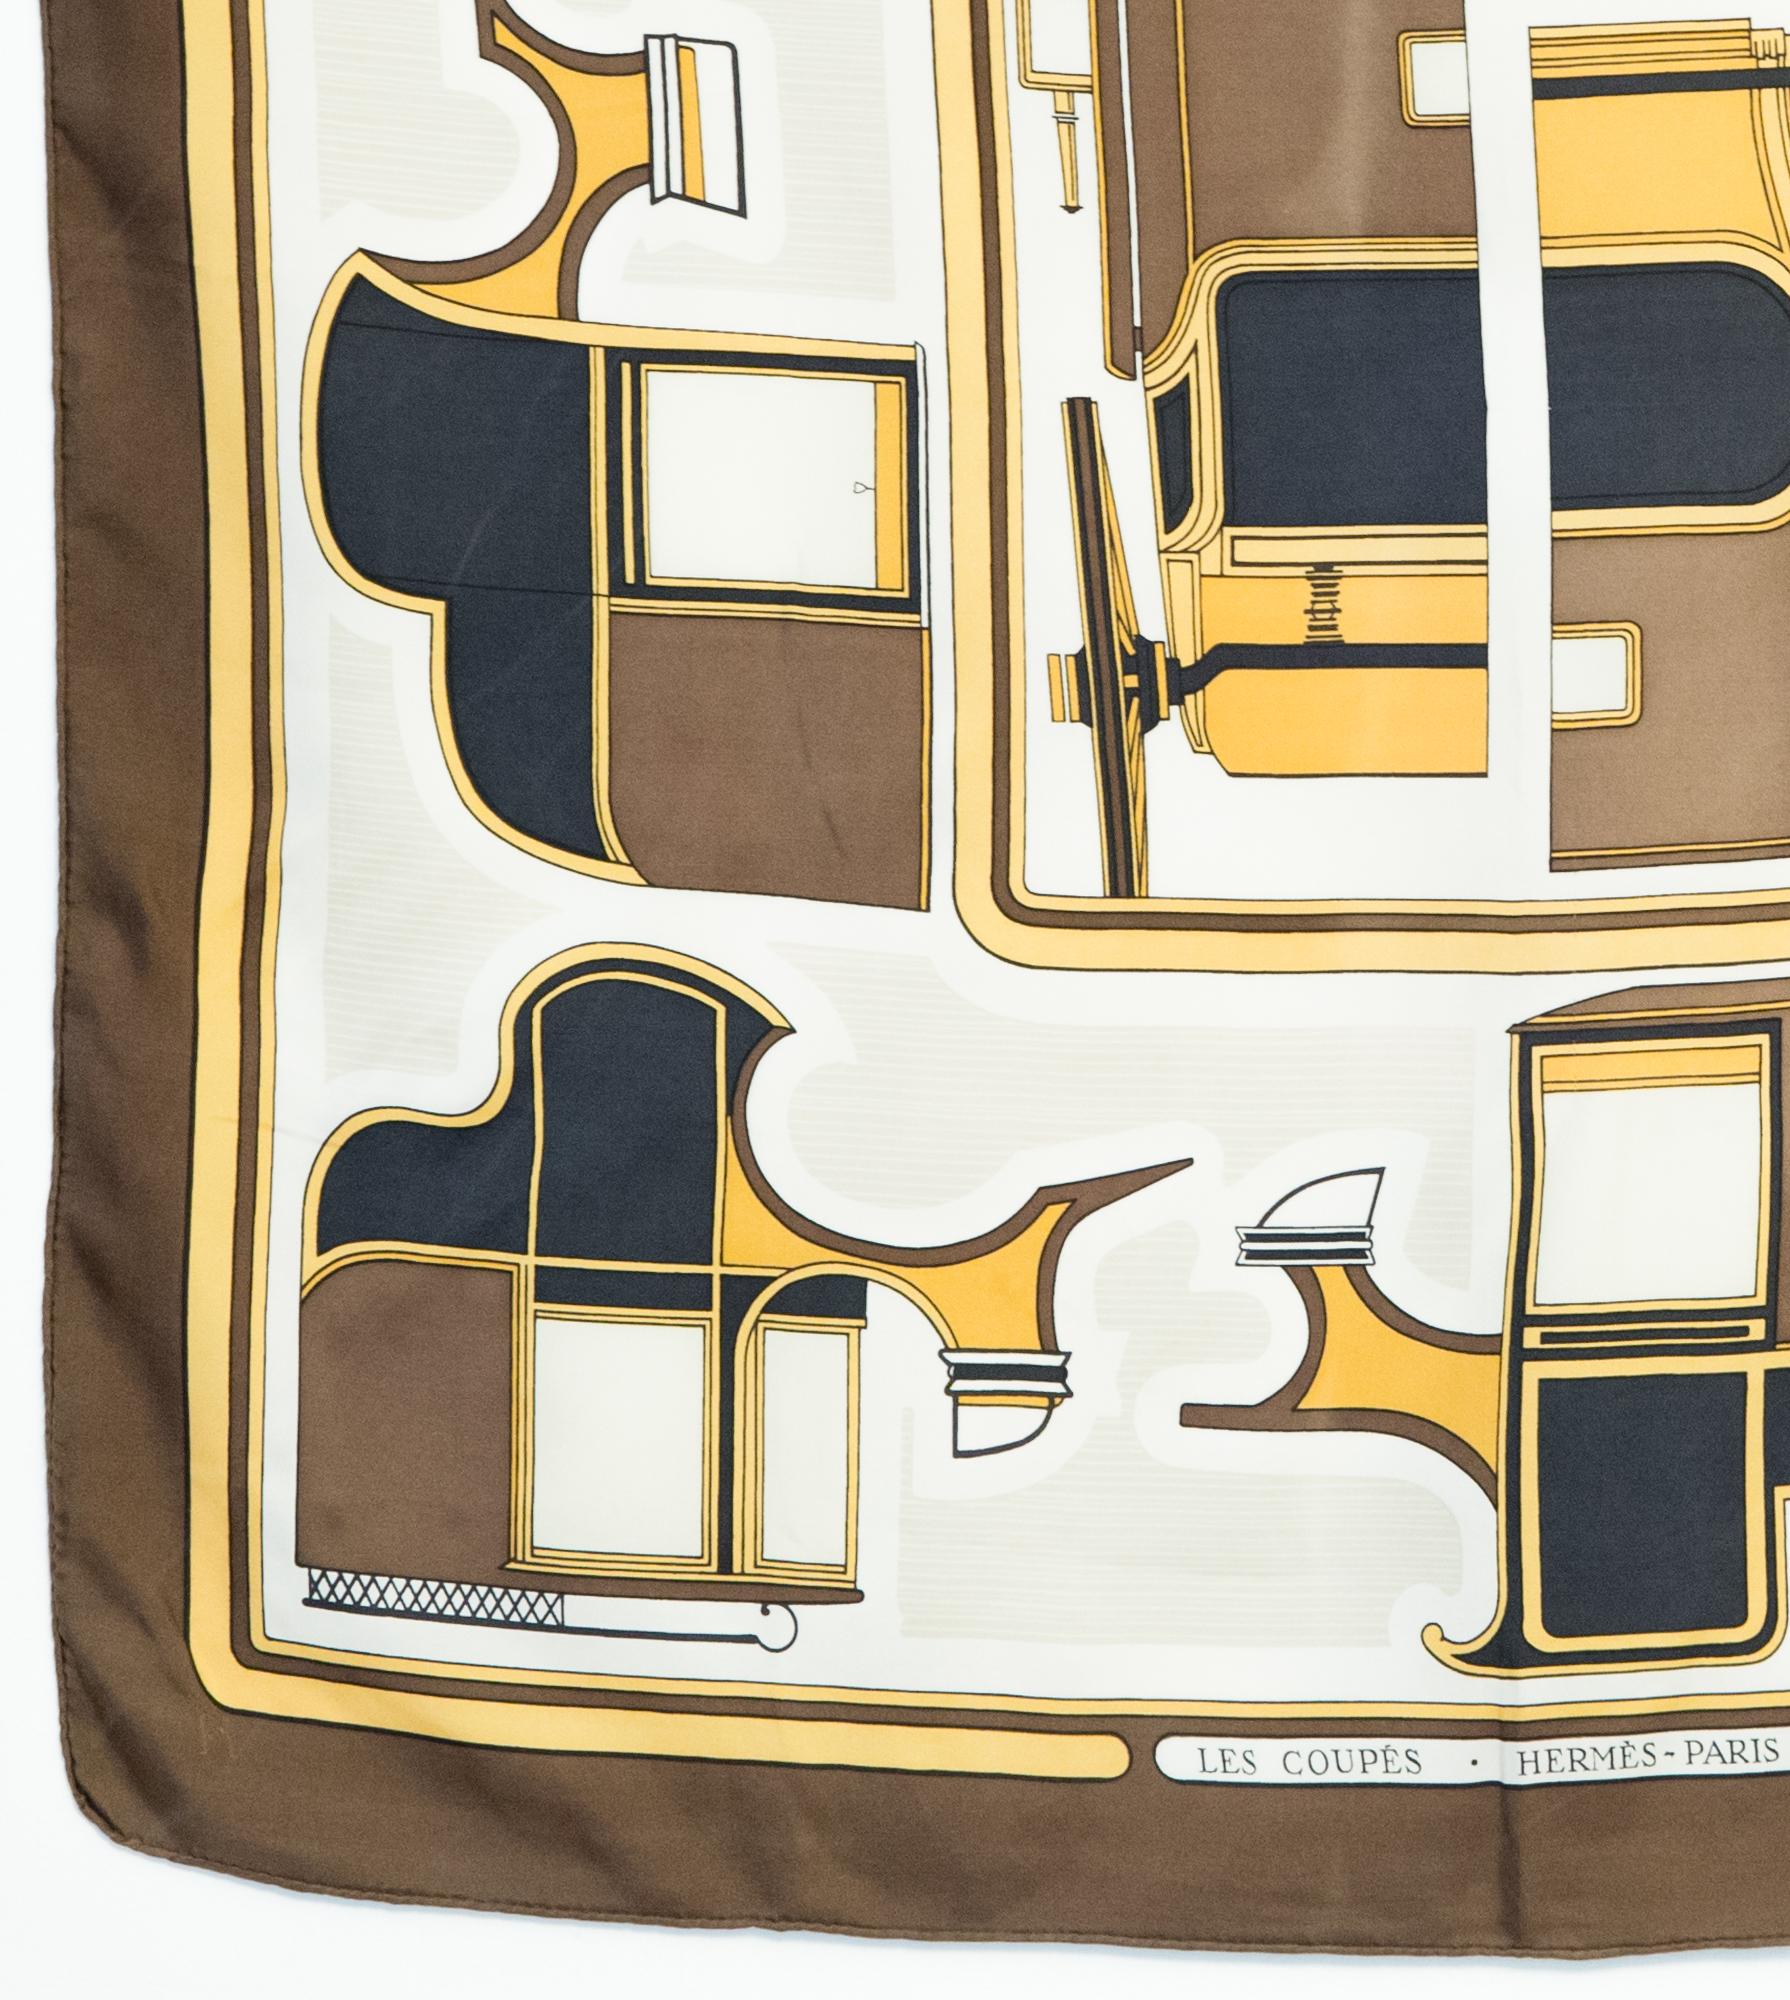 1975 Hermes Les Coupes by F.de la Perriere Silk Scarf In Good Condition For Sale In Paris, FR